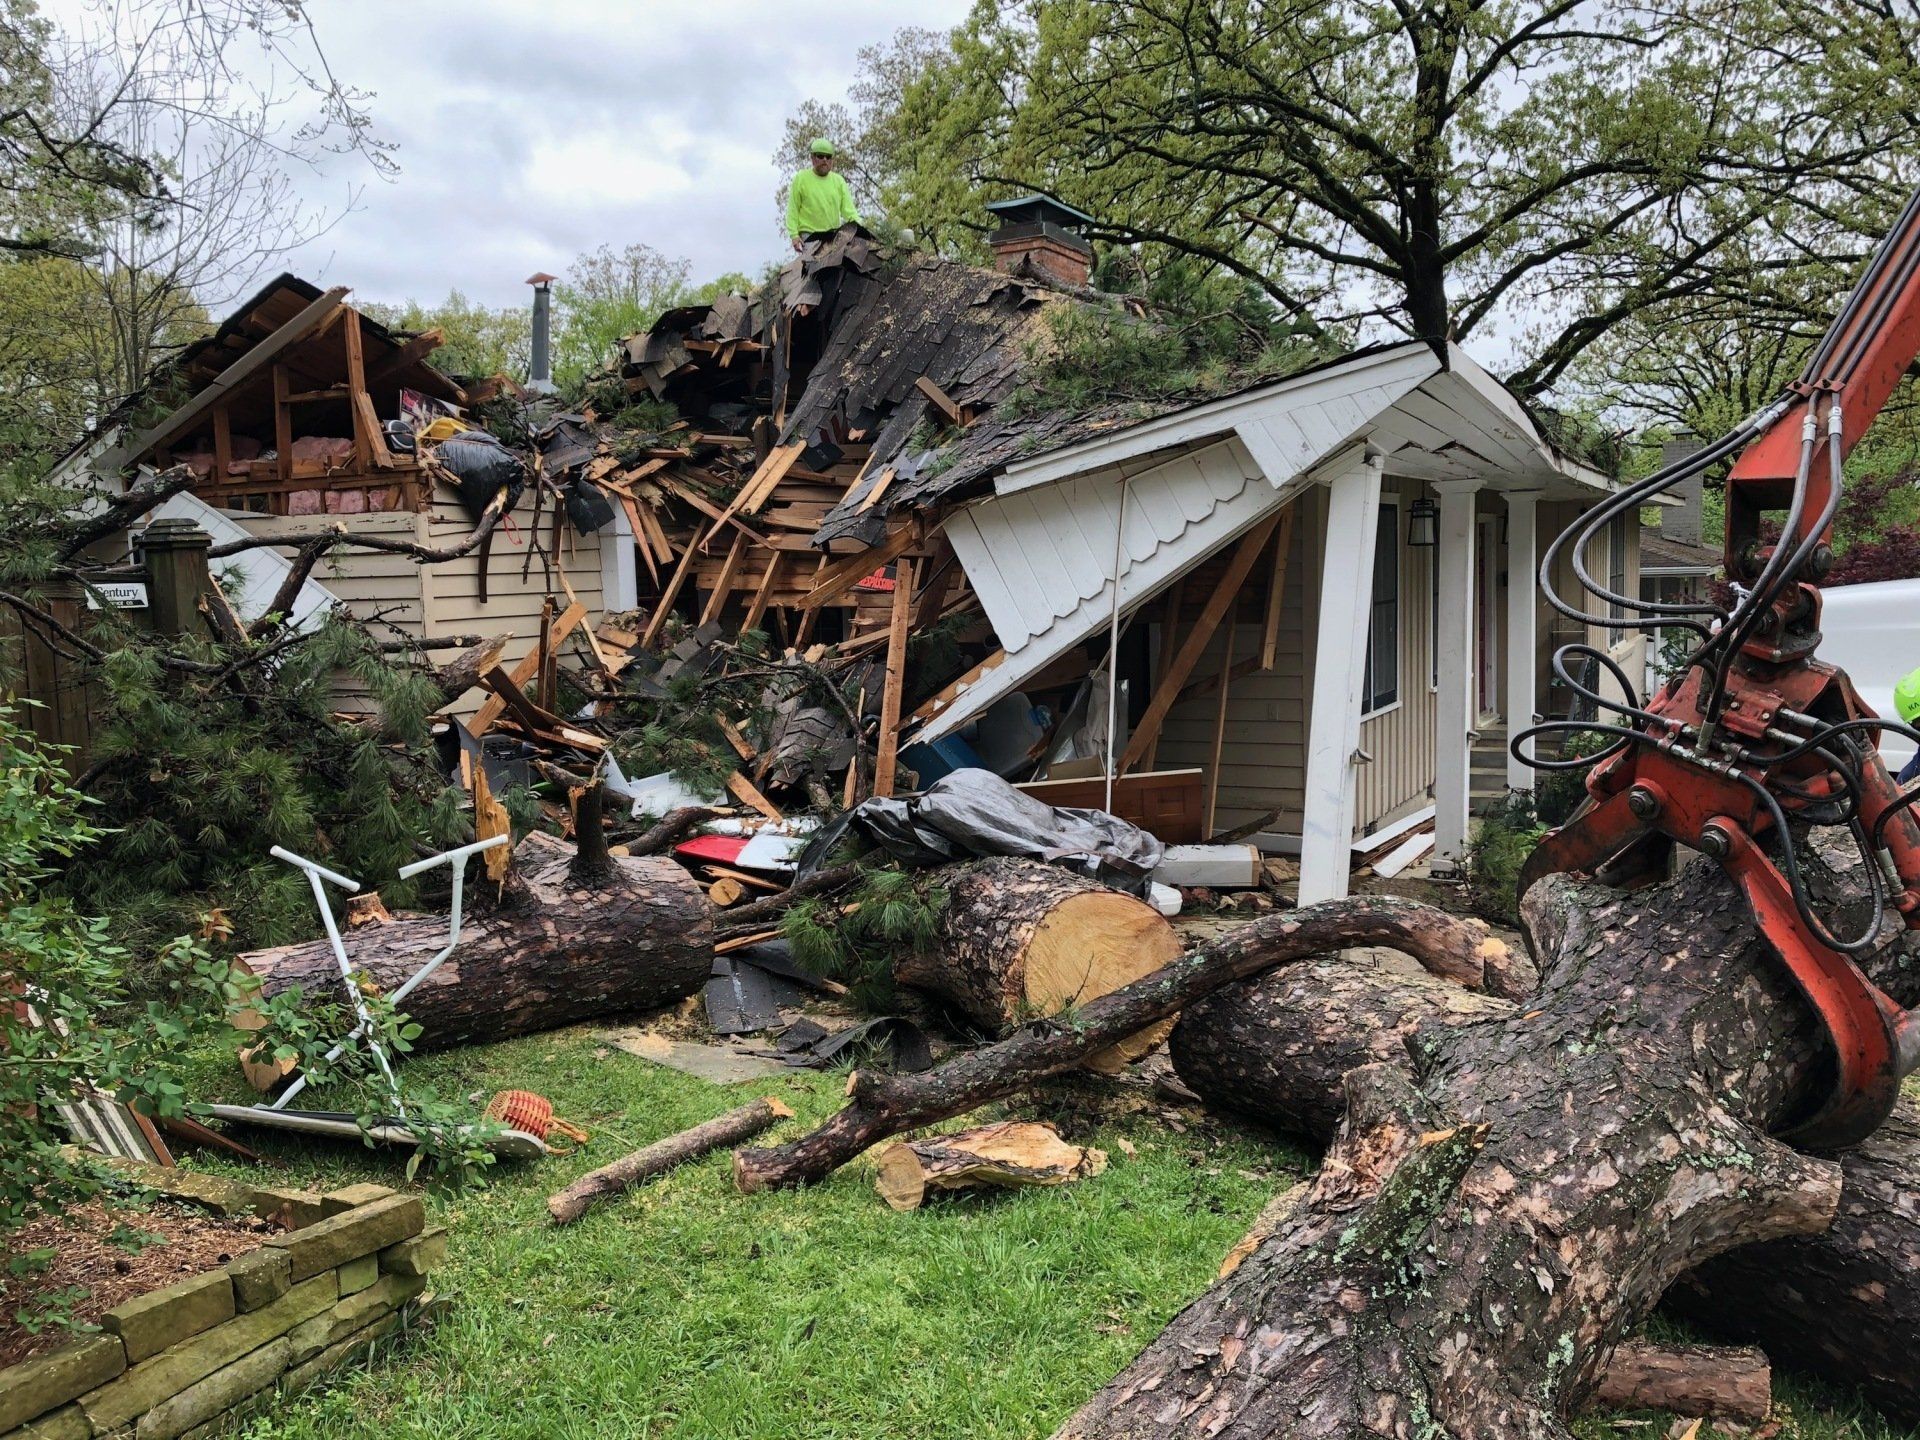 Big tree fallen on residential home in Arkansas after thunderstorms with high wind